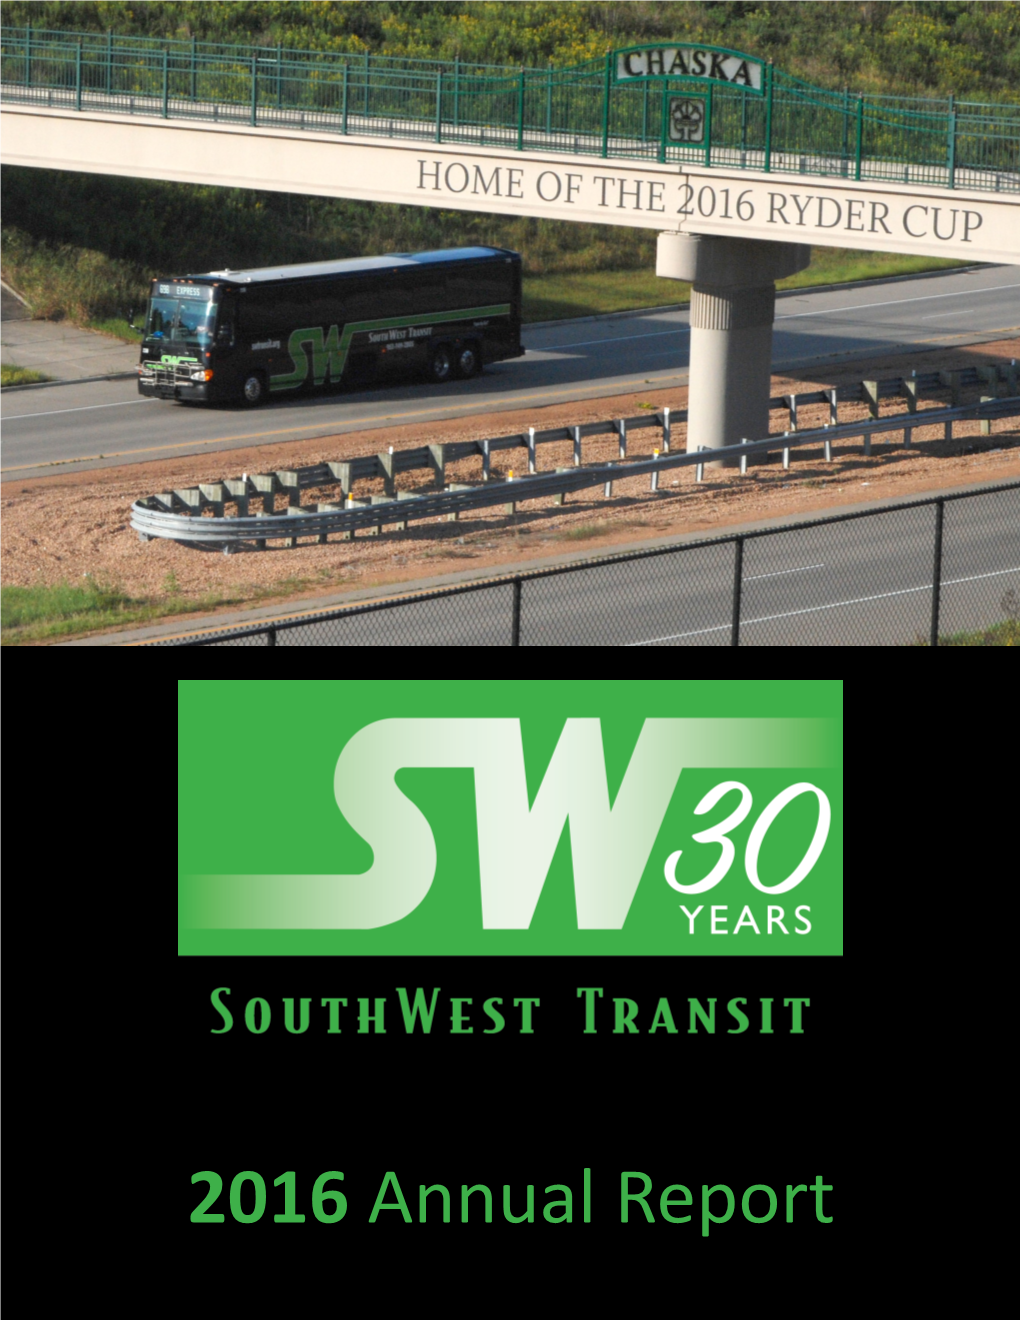 2016 Annual Report to Southwest Transit’S Loyal Riders and Friends